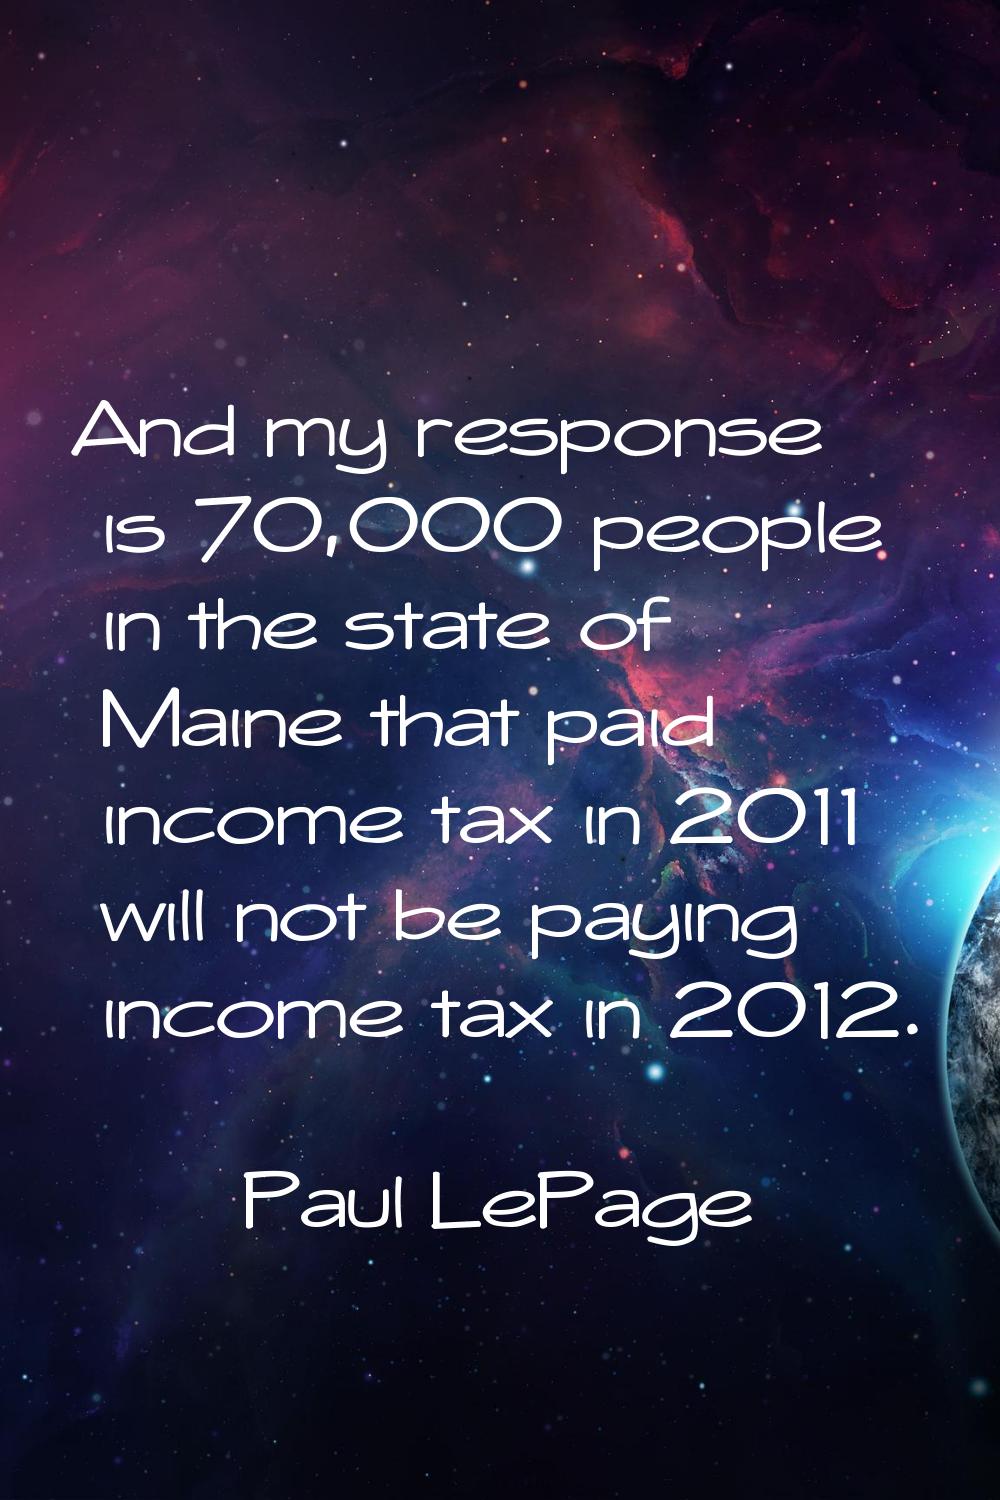 And my response is 70,000 people in the state of Maine that paid income tax in 2011 will not be pay